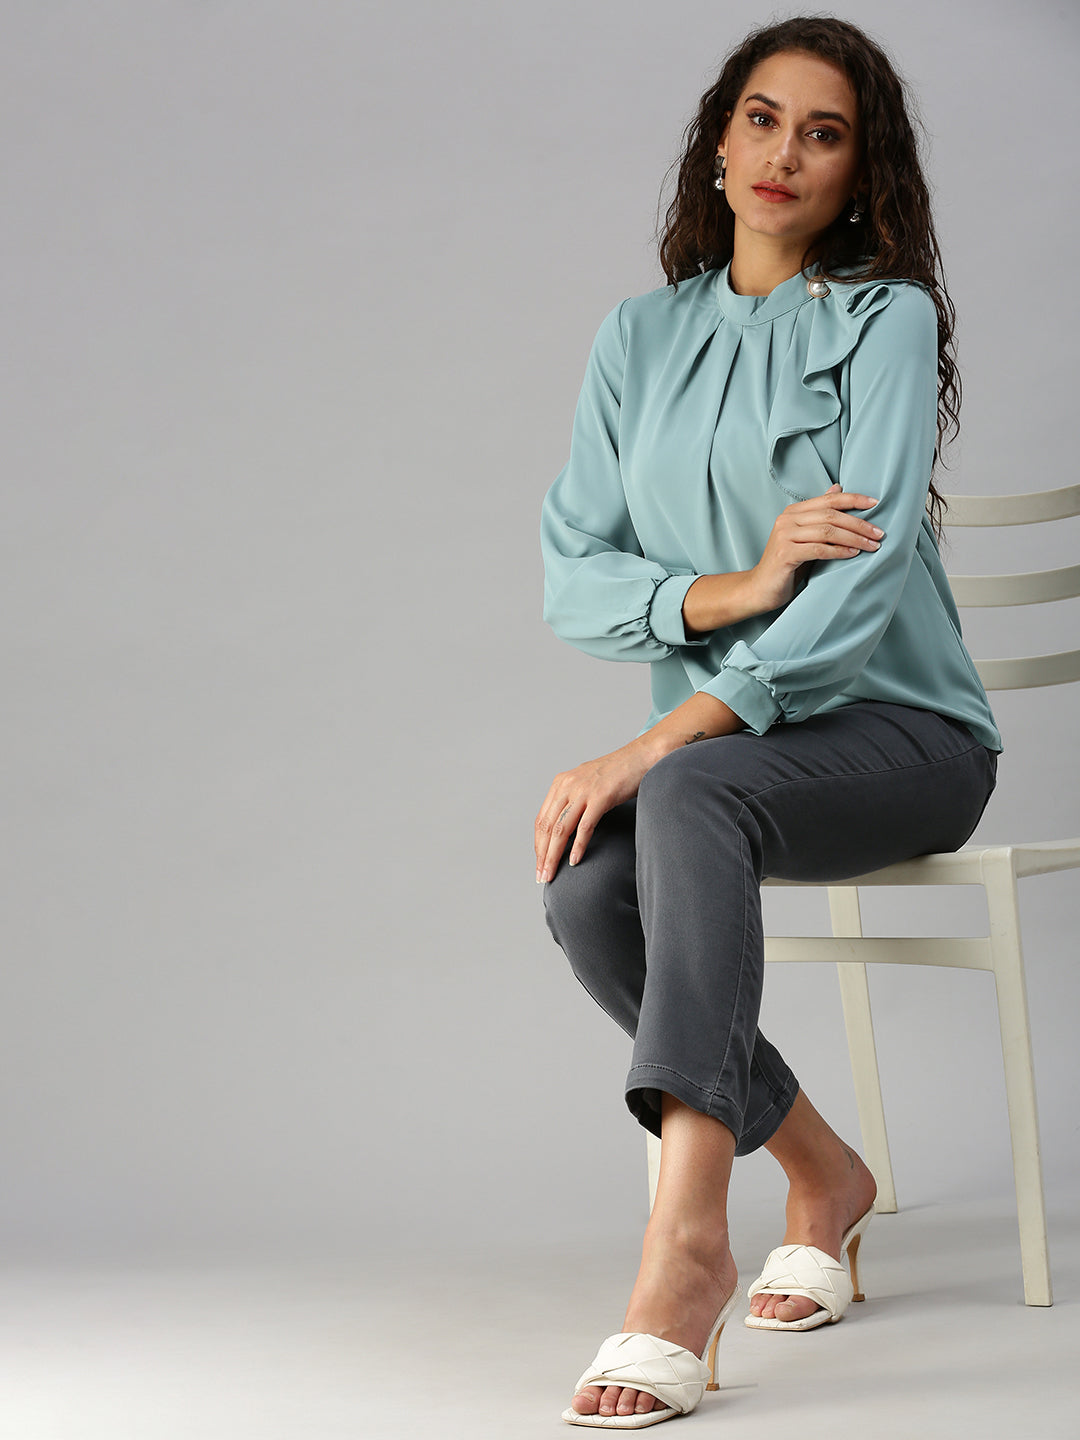 Women Solid Turquoise Blue Top